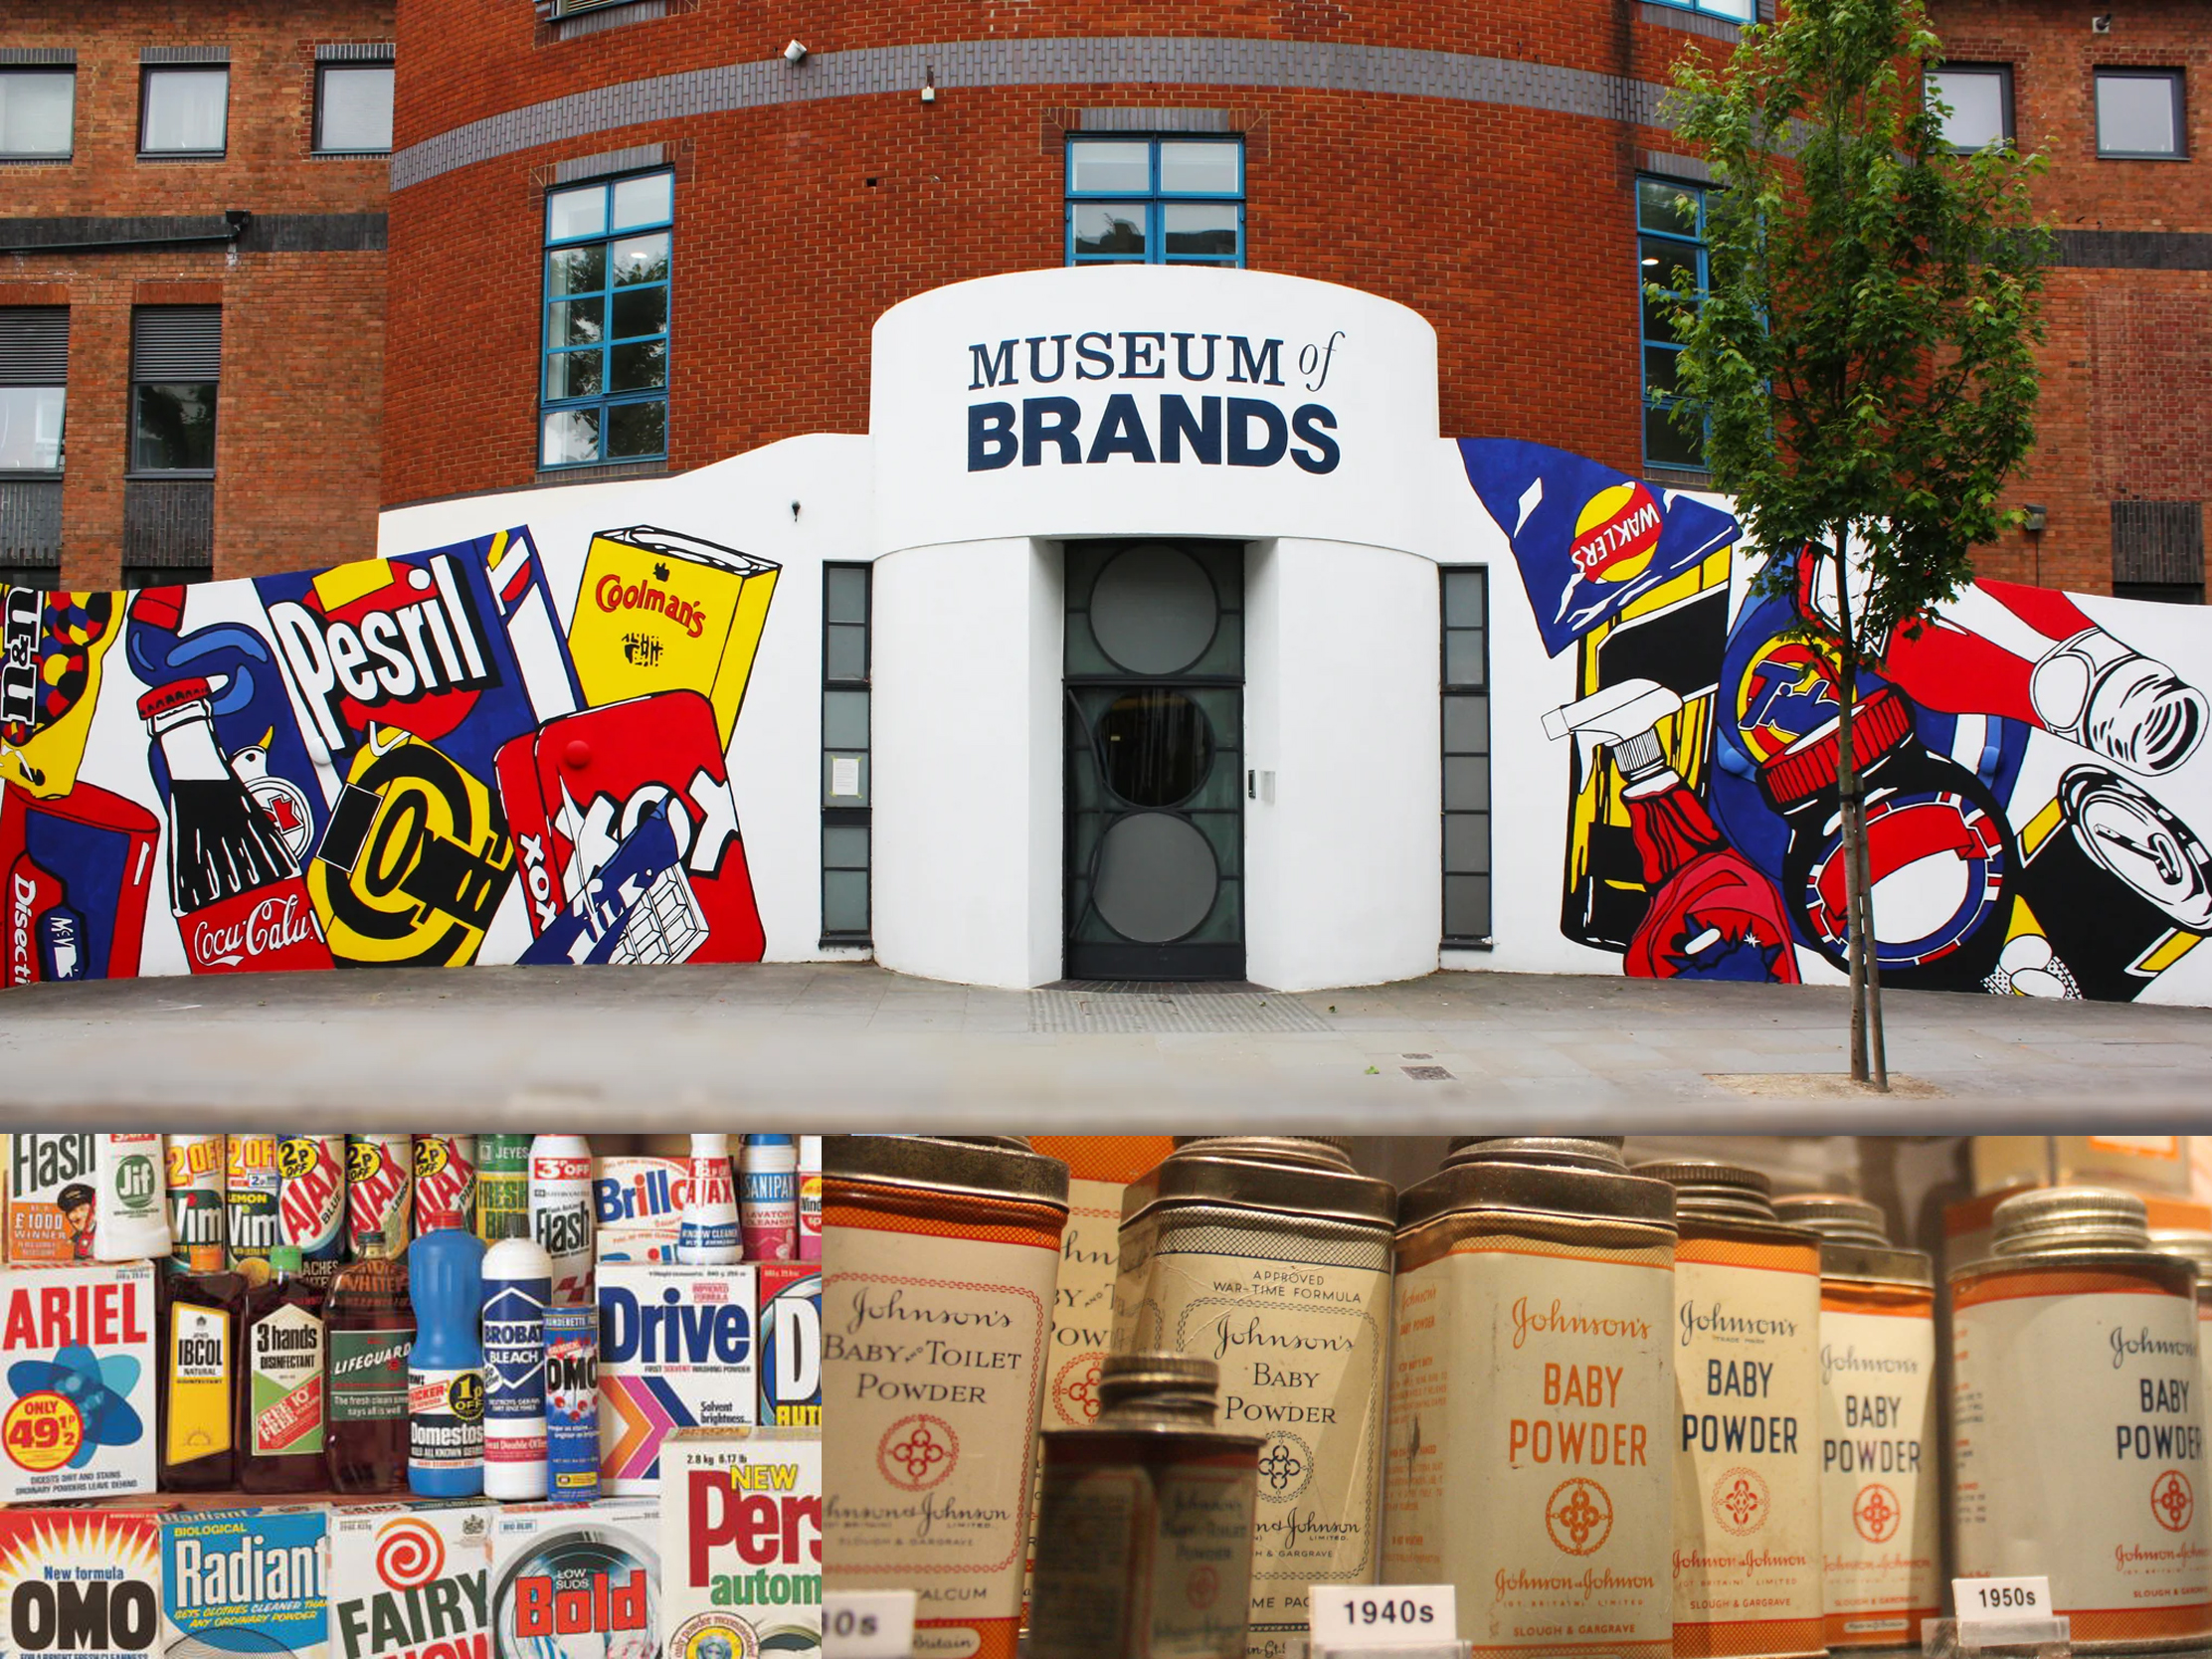 The Museum of Brands London